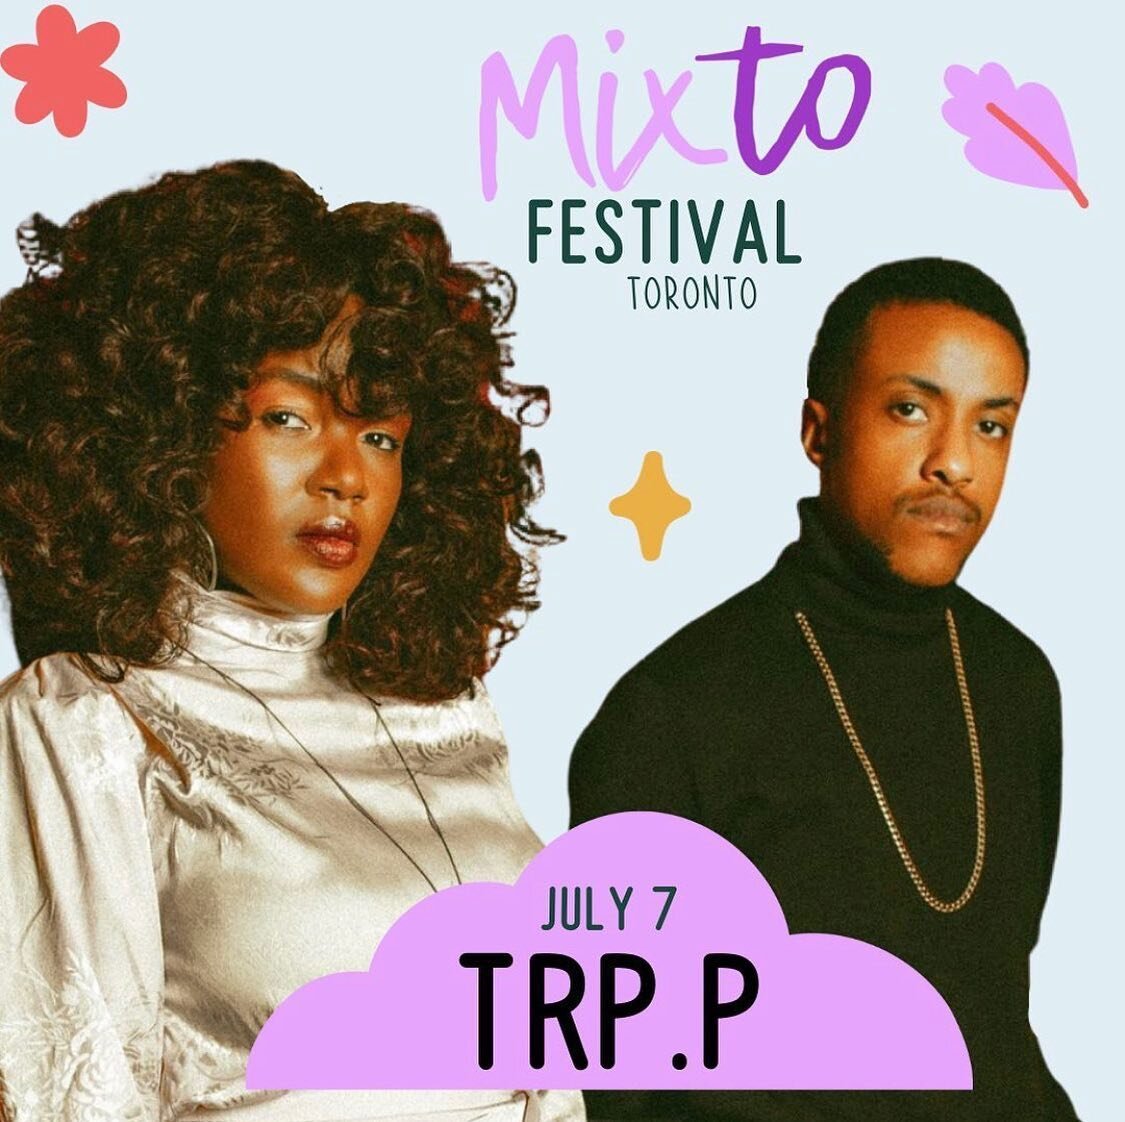 TOMORROW NIGHT!! We&rsquo;re going up with @mixtofestival at @lulalounge! We can&rsquo;t wait to perform some new chunes! See you there?? Bet! 😊🪞